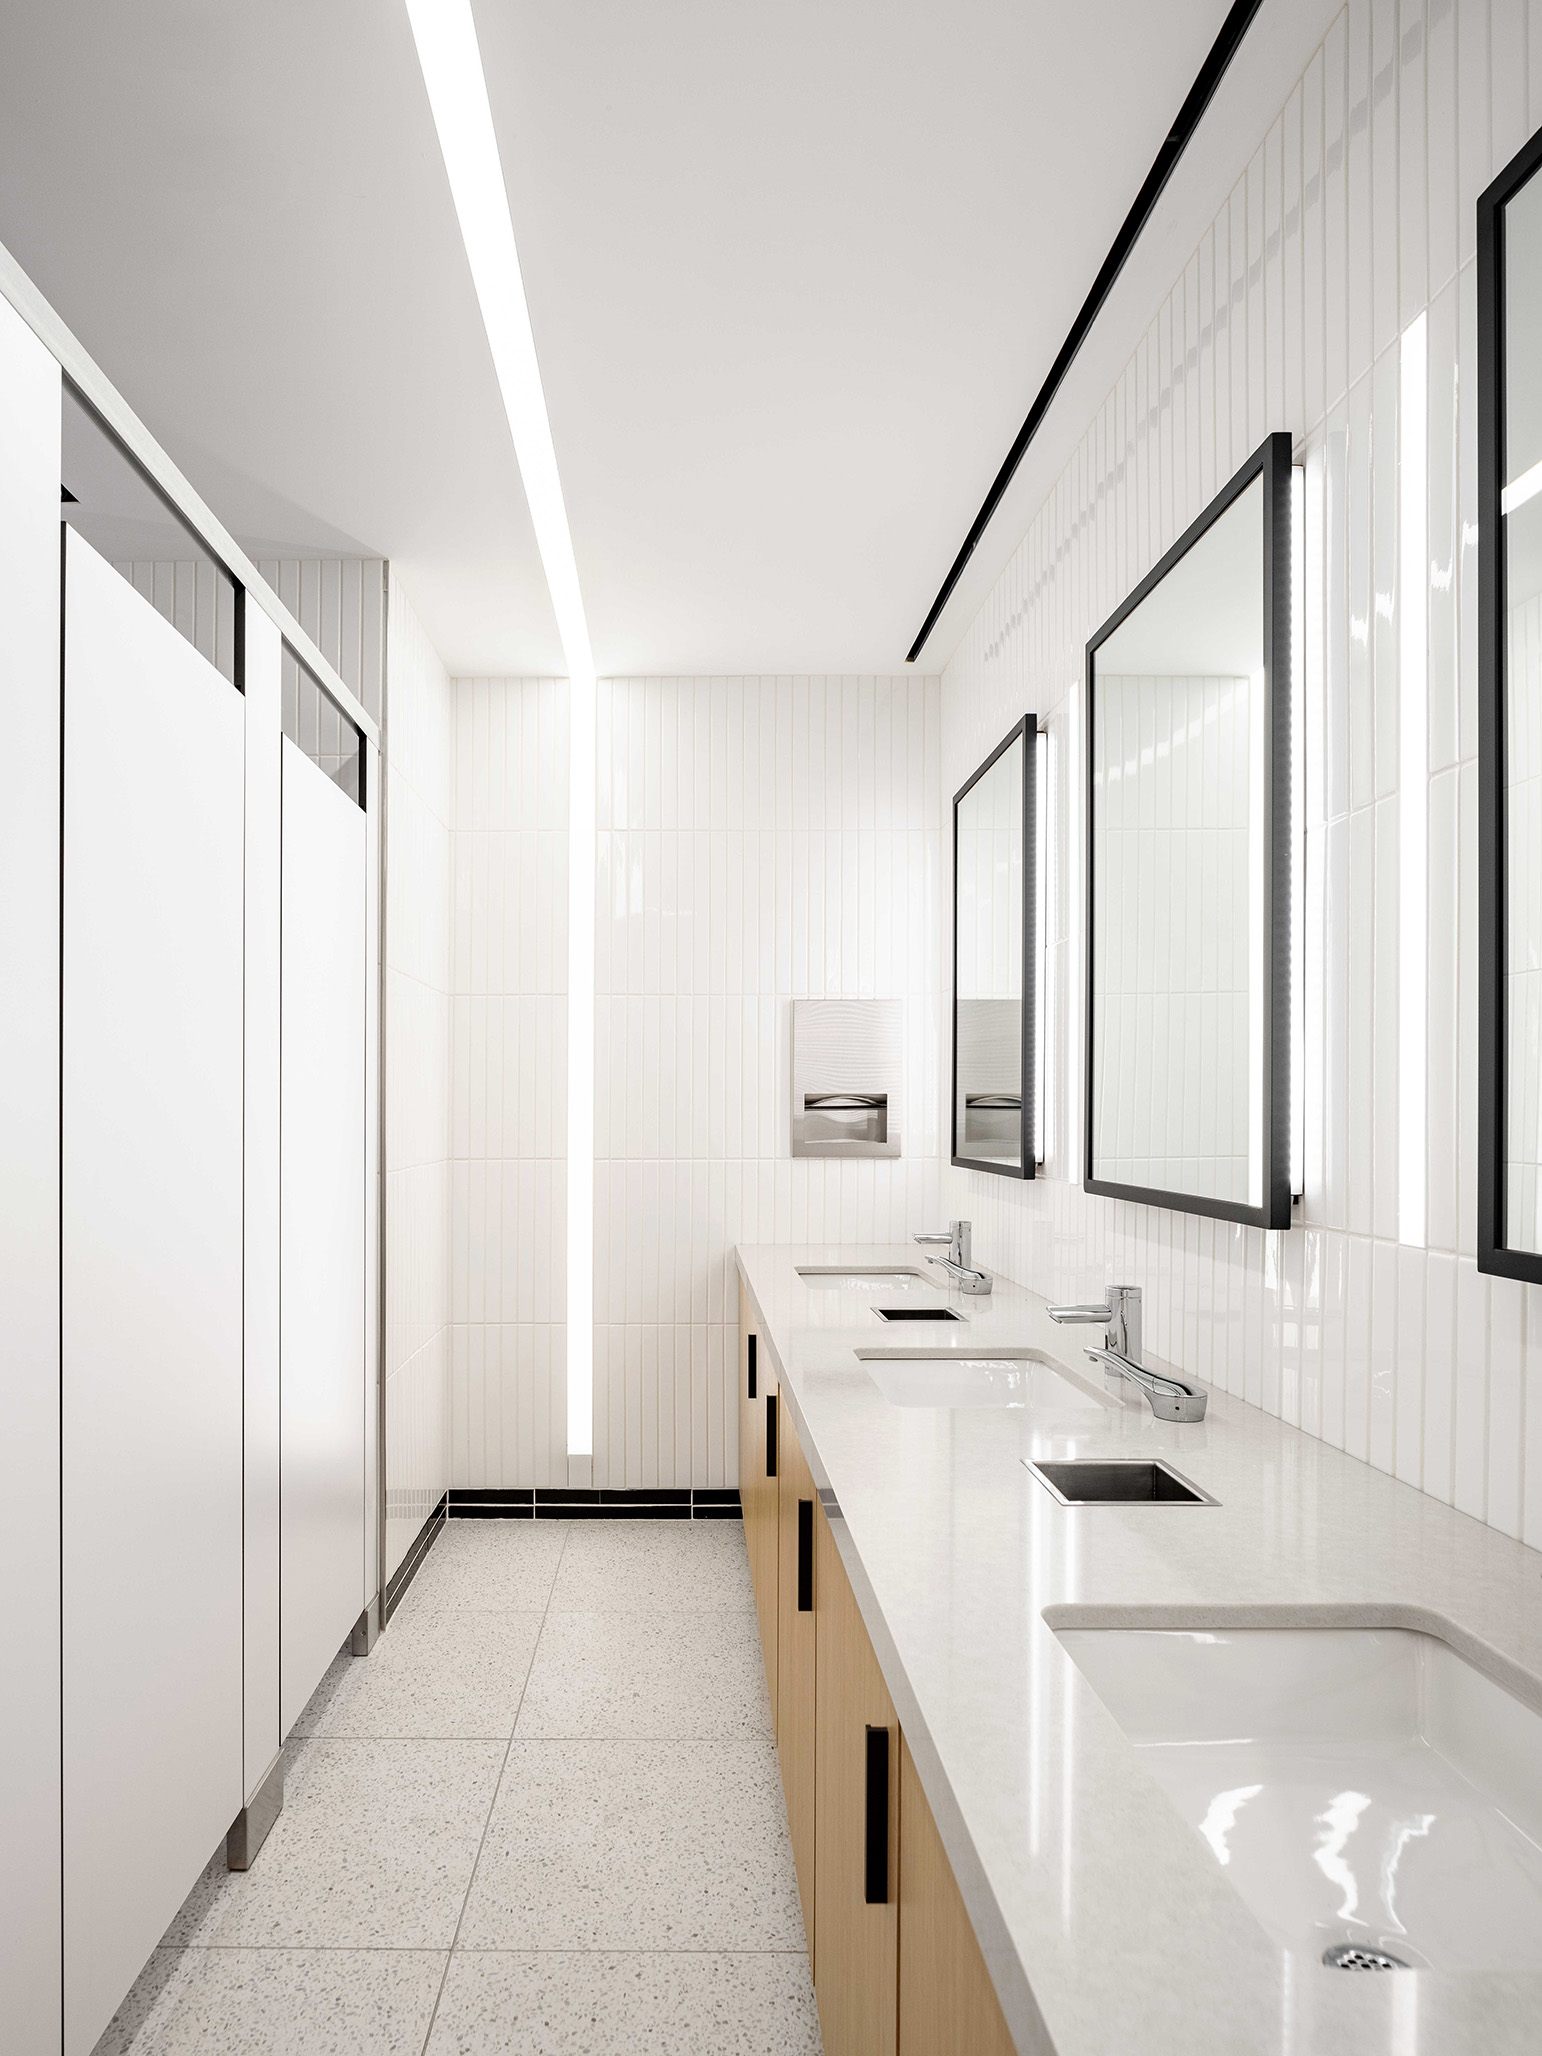 Vacant washroom and change area provide residents with modern comfort